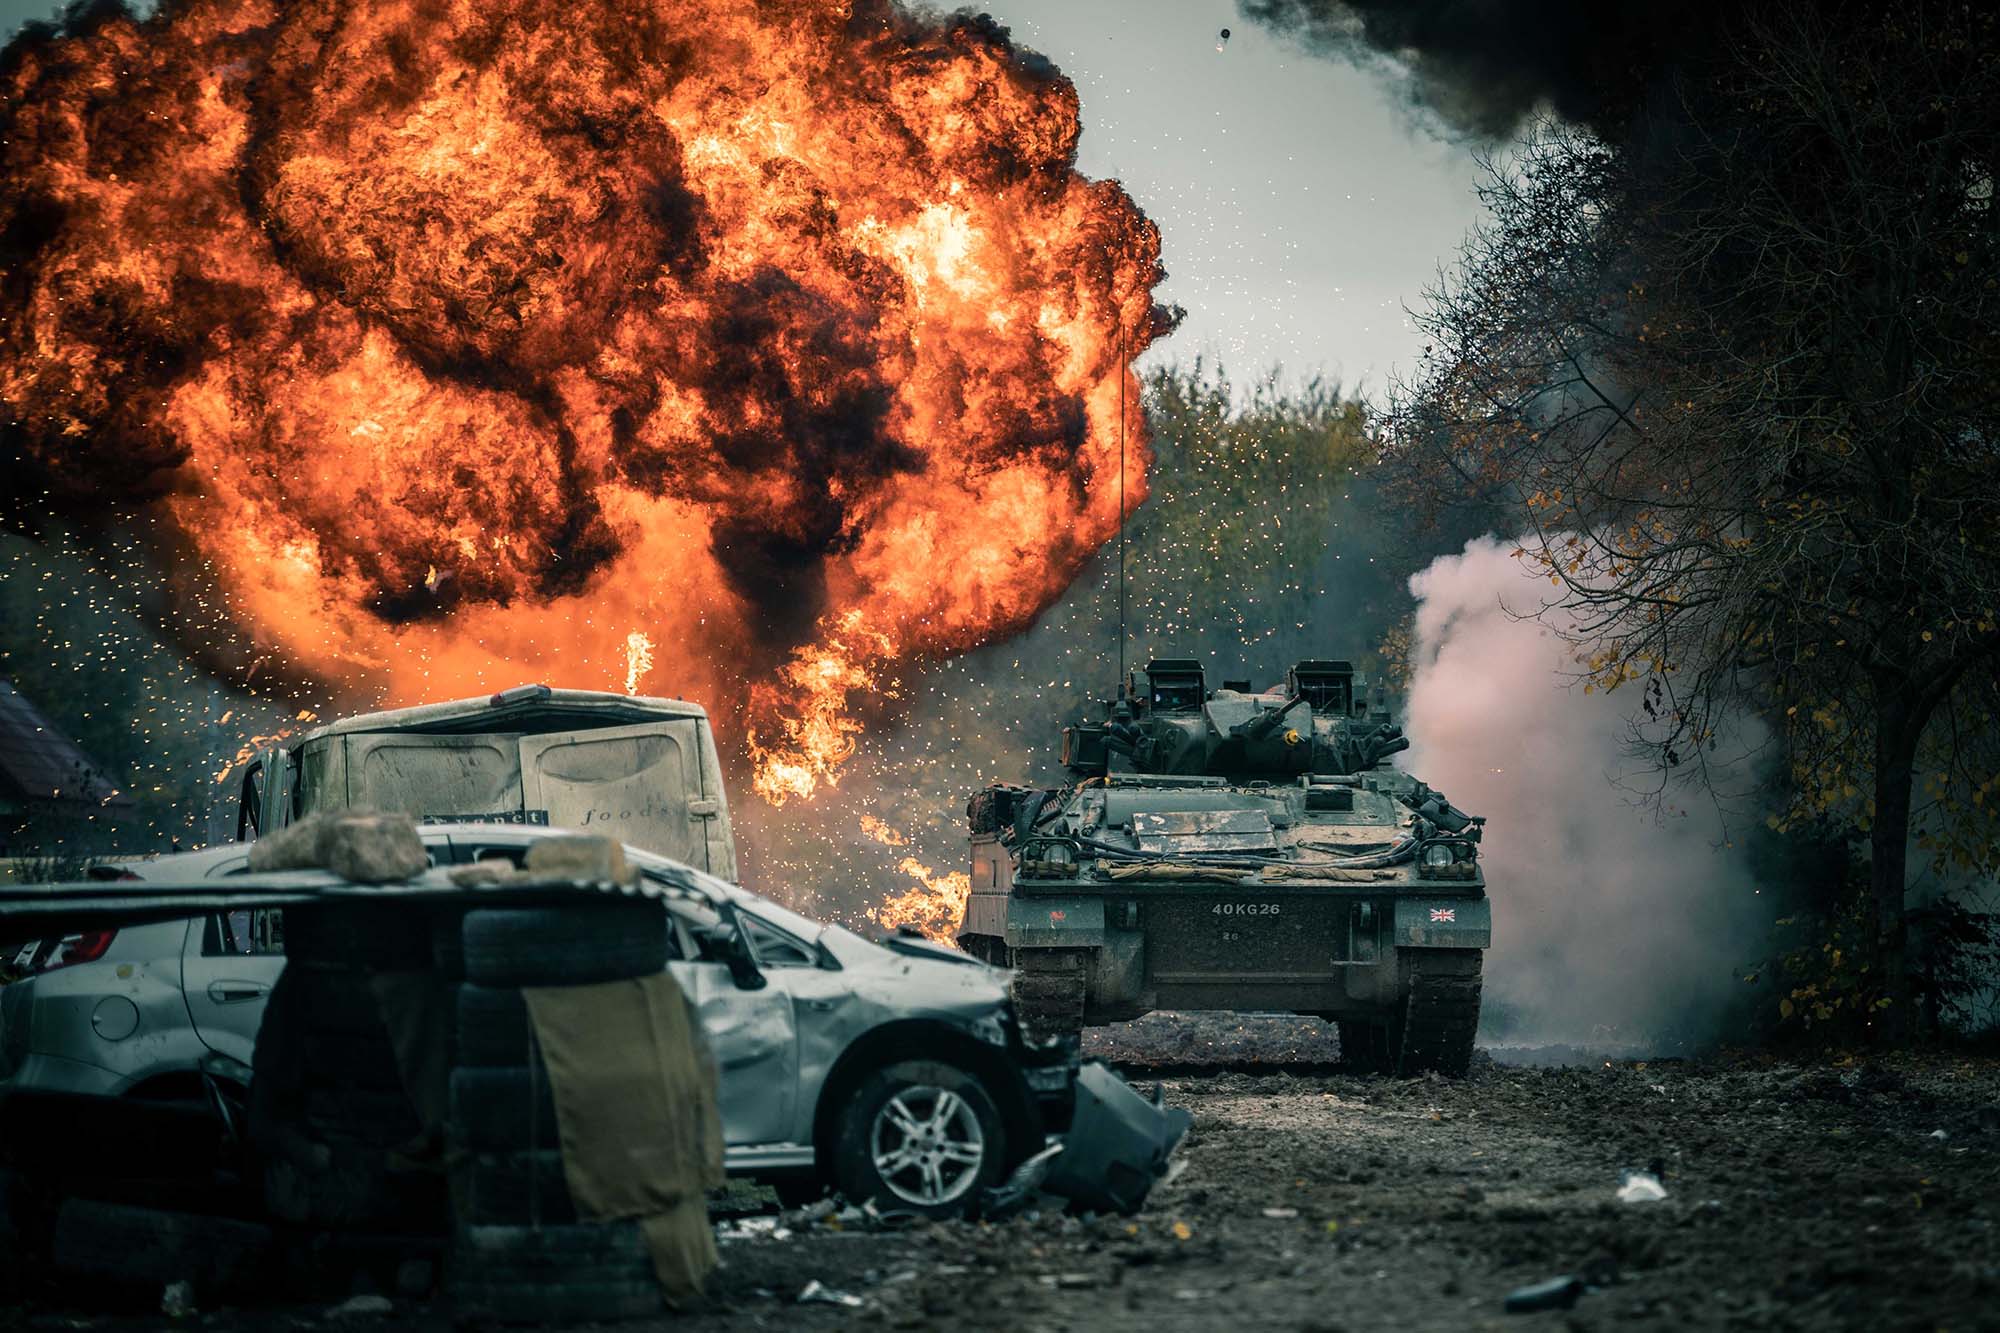 A tank driving away from a large fireball explosion during a training exercise